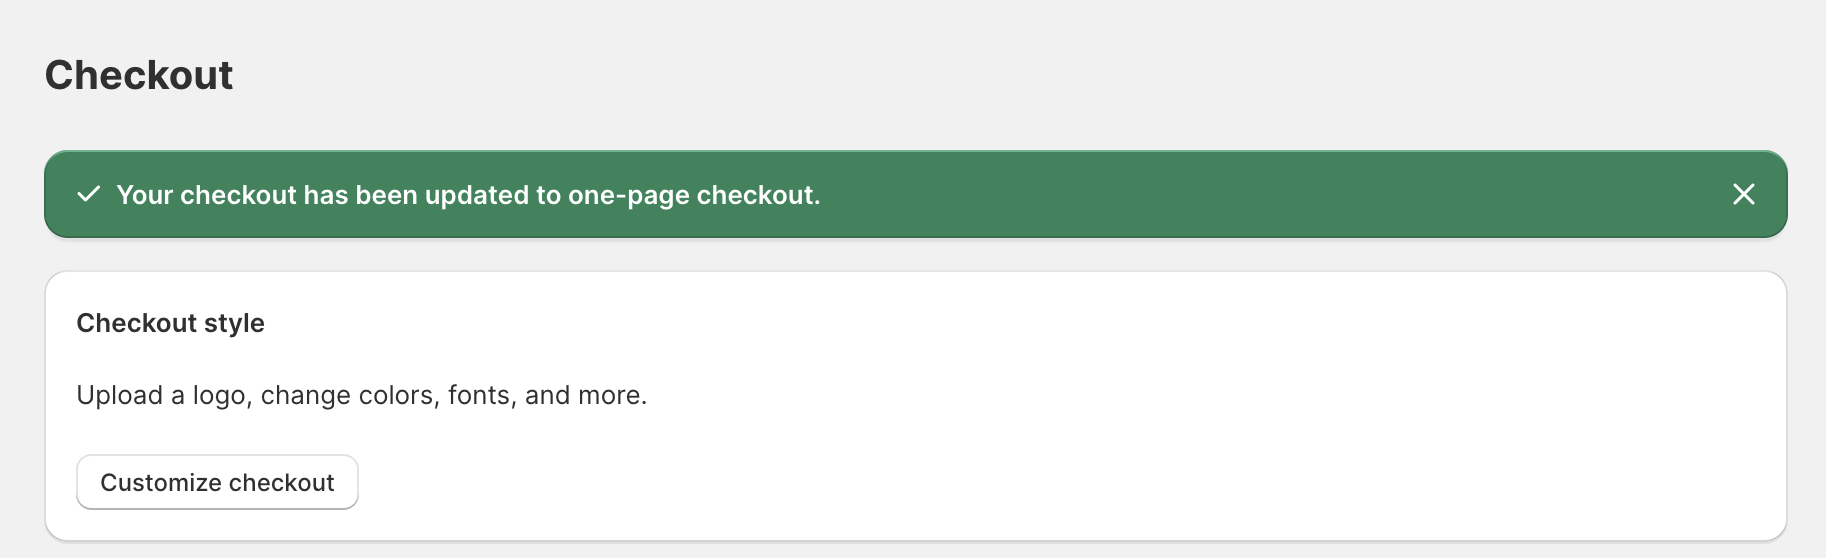 One-page checkout on Shopify is now available to all merchants!